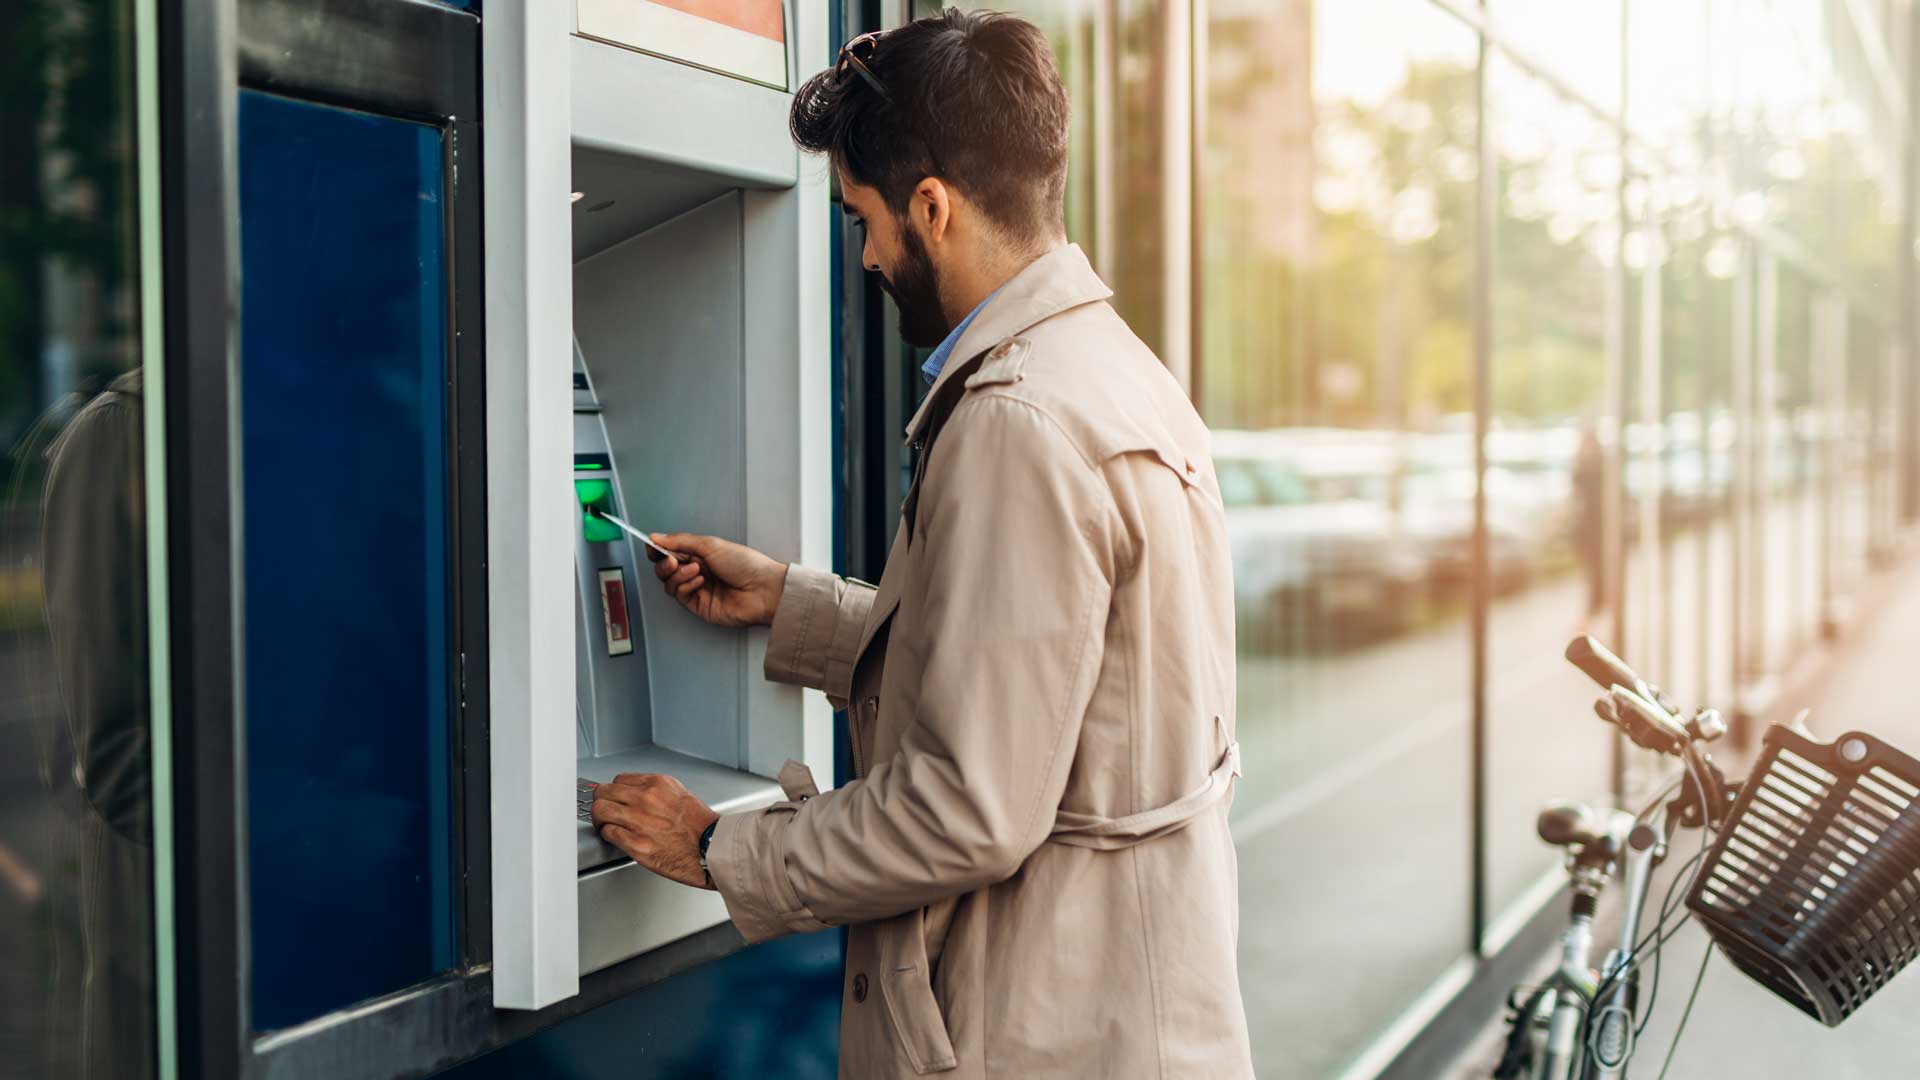 Your-Guide-to-Starting-an-ATM-Business-by-ATM-Advantage